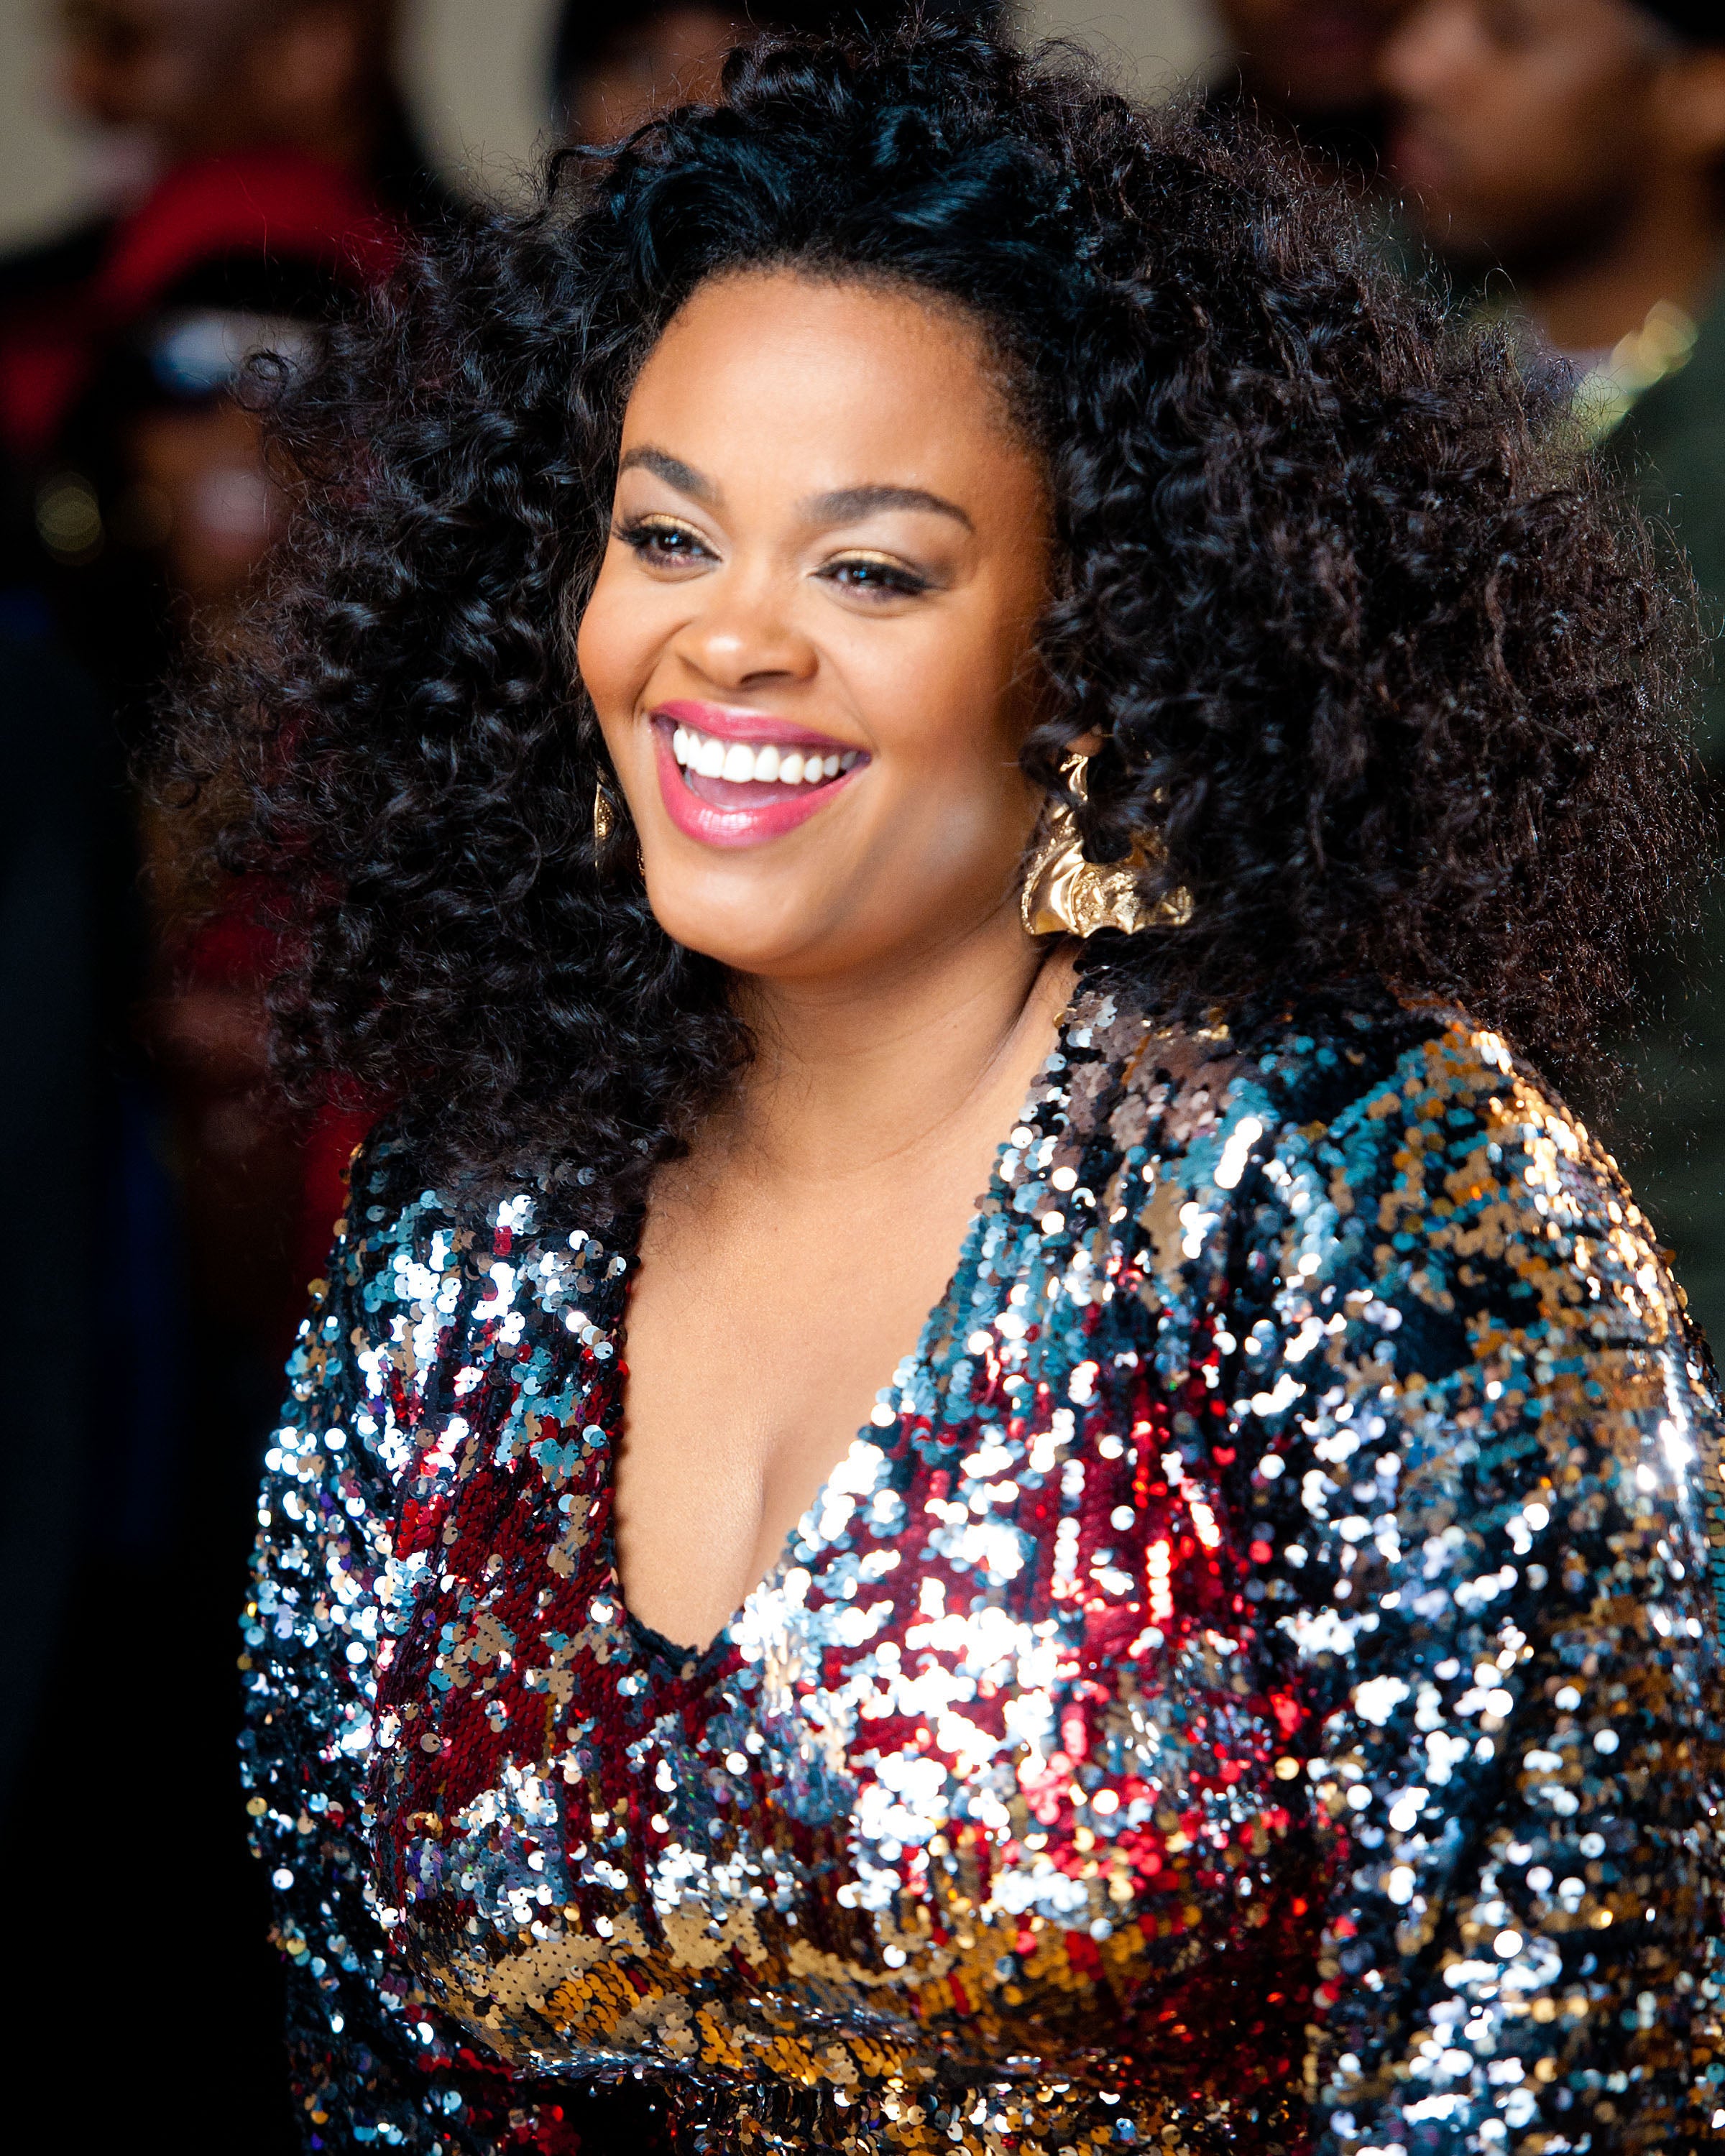 Have You Earned the Right To Call Jill Scott 'Jilly from Philly'?